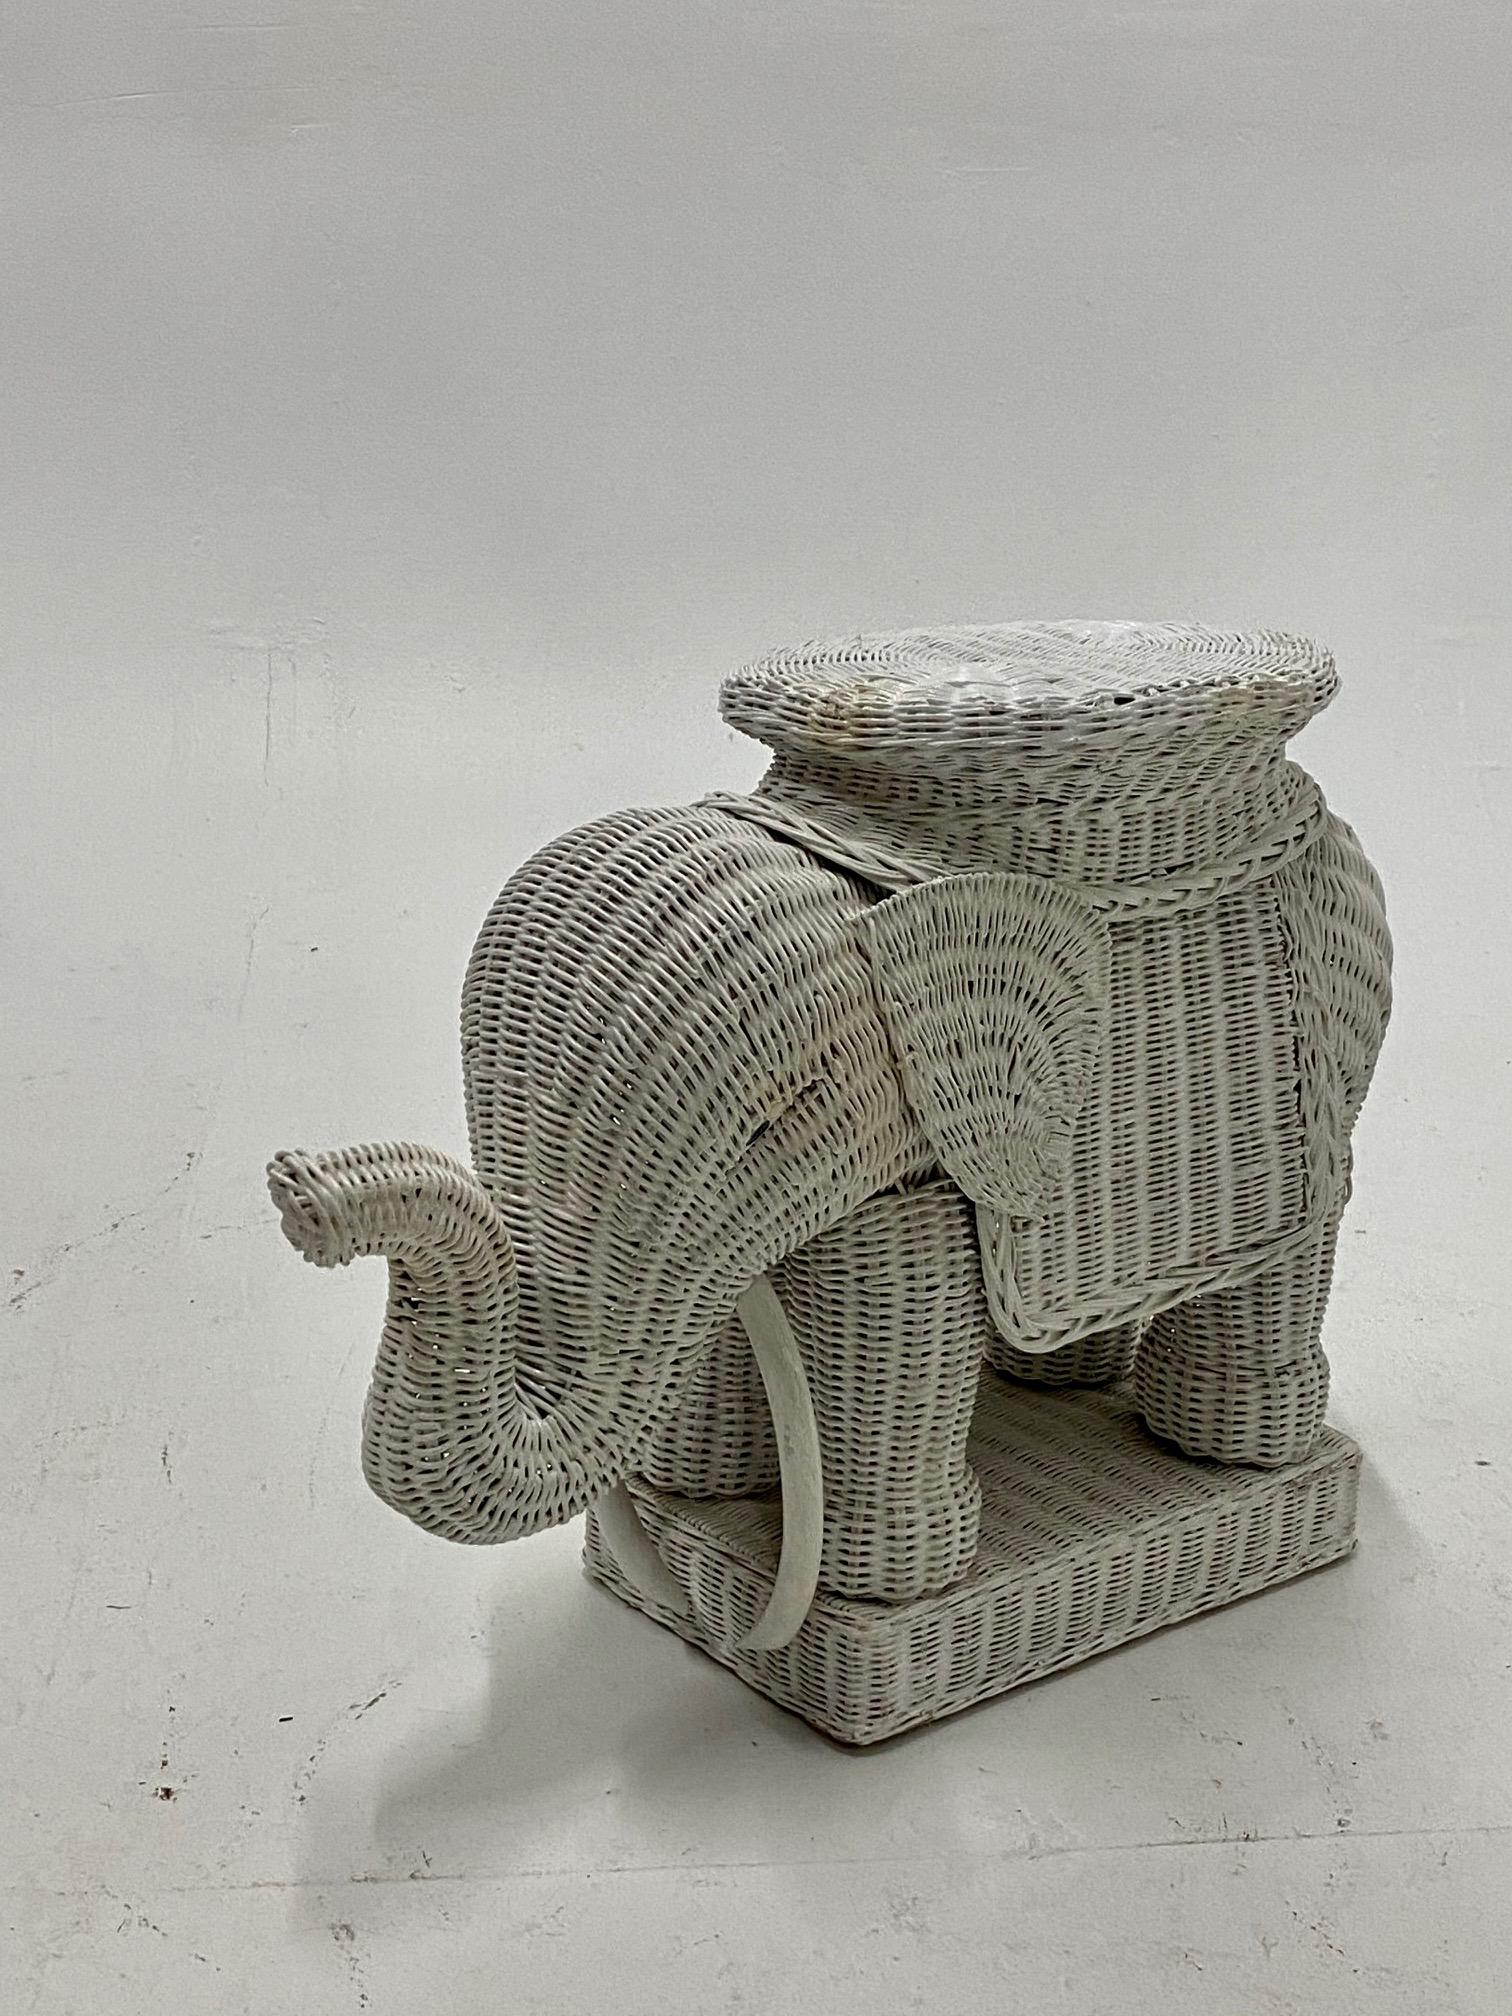 American Fun Vintage Wicker and Rattan Elephant End Table